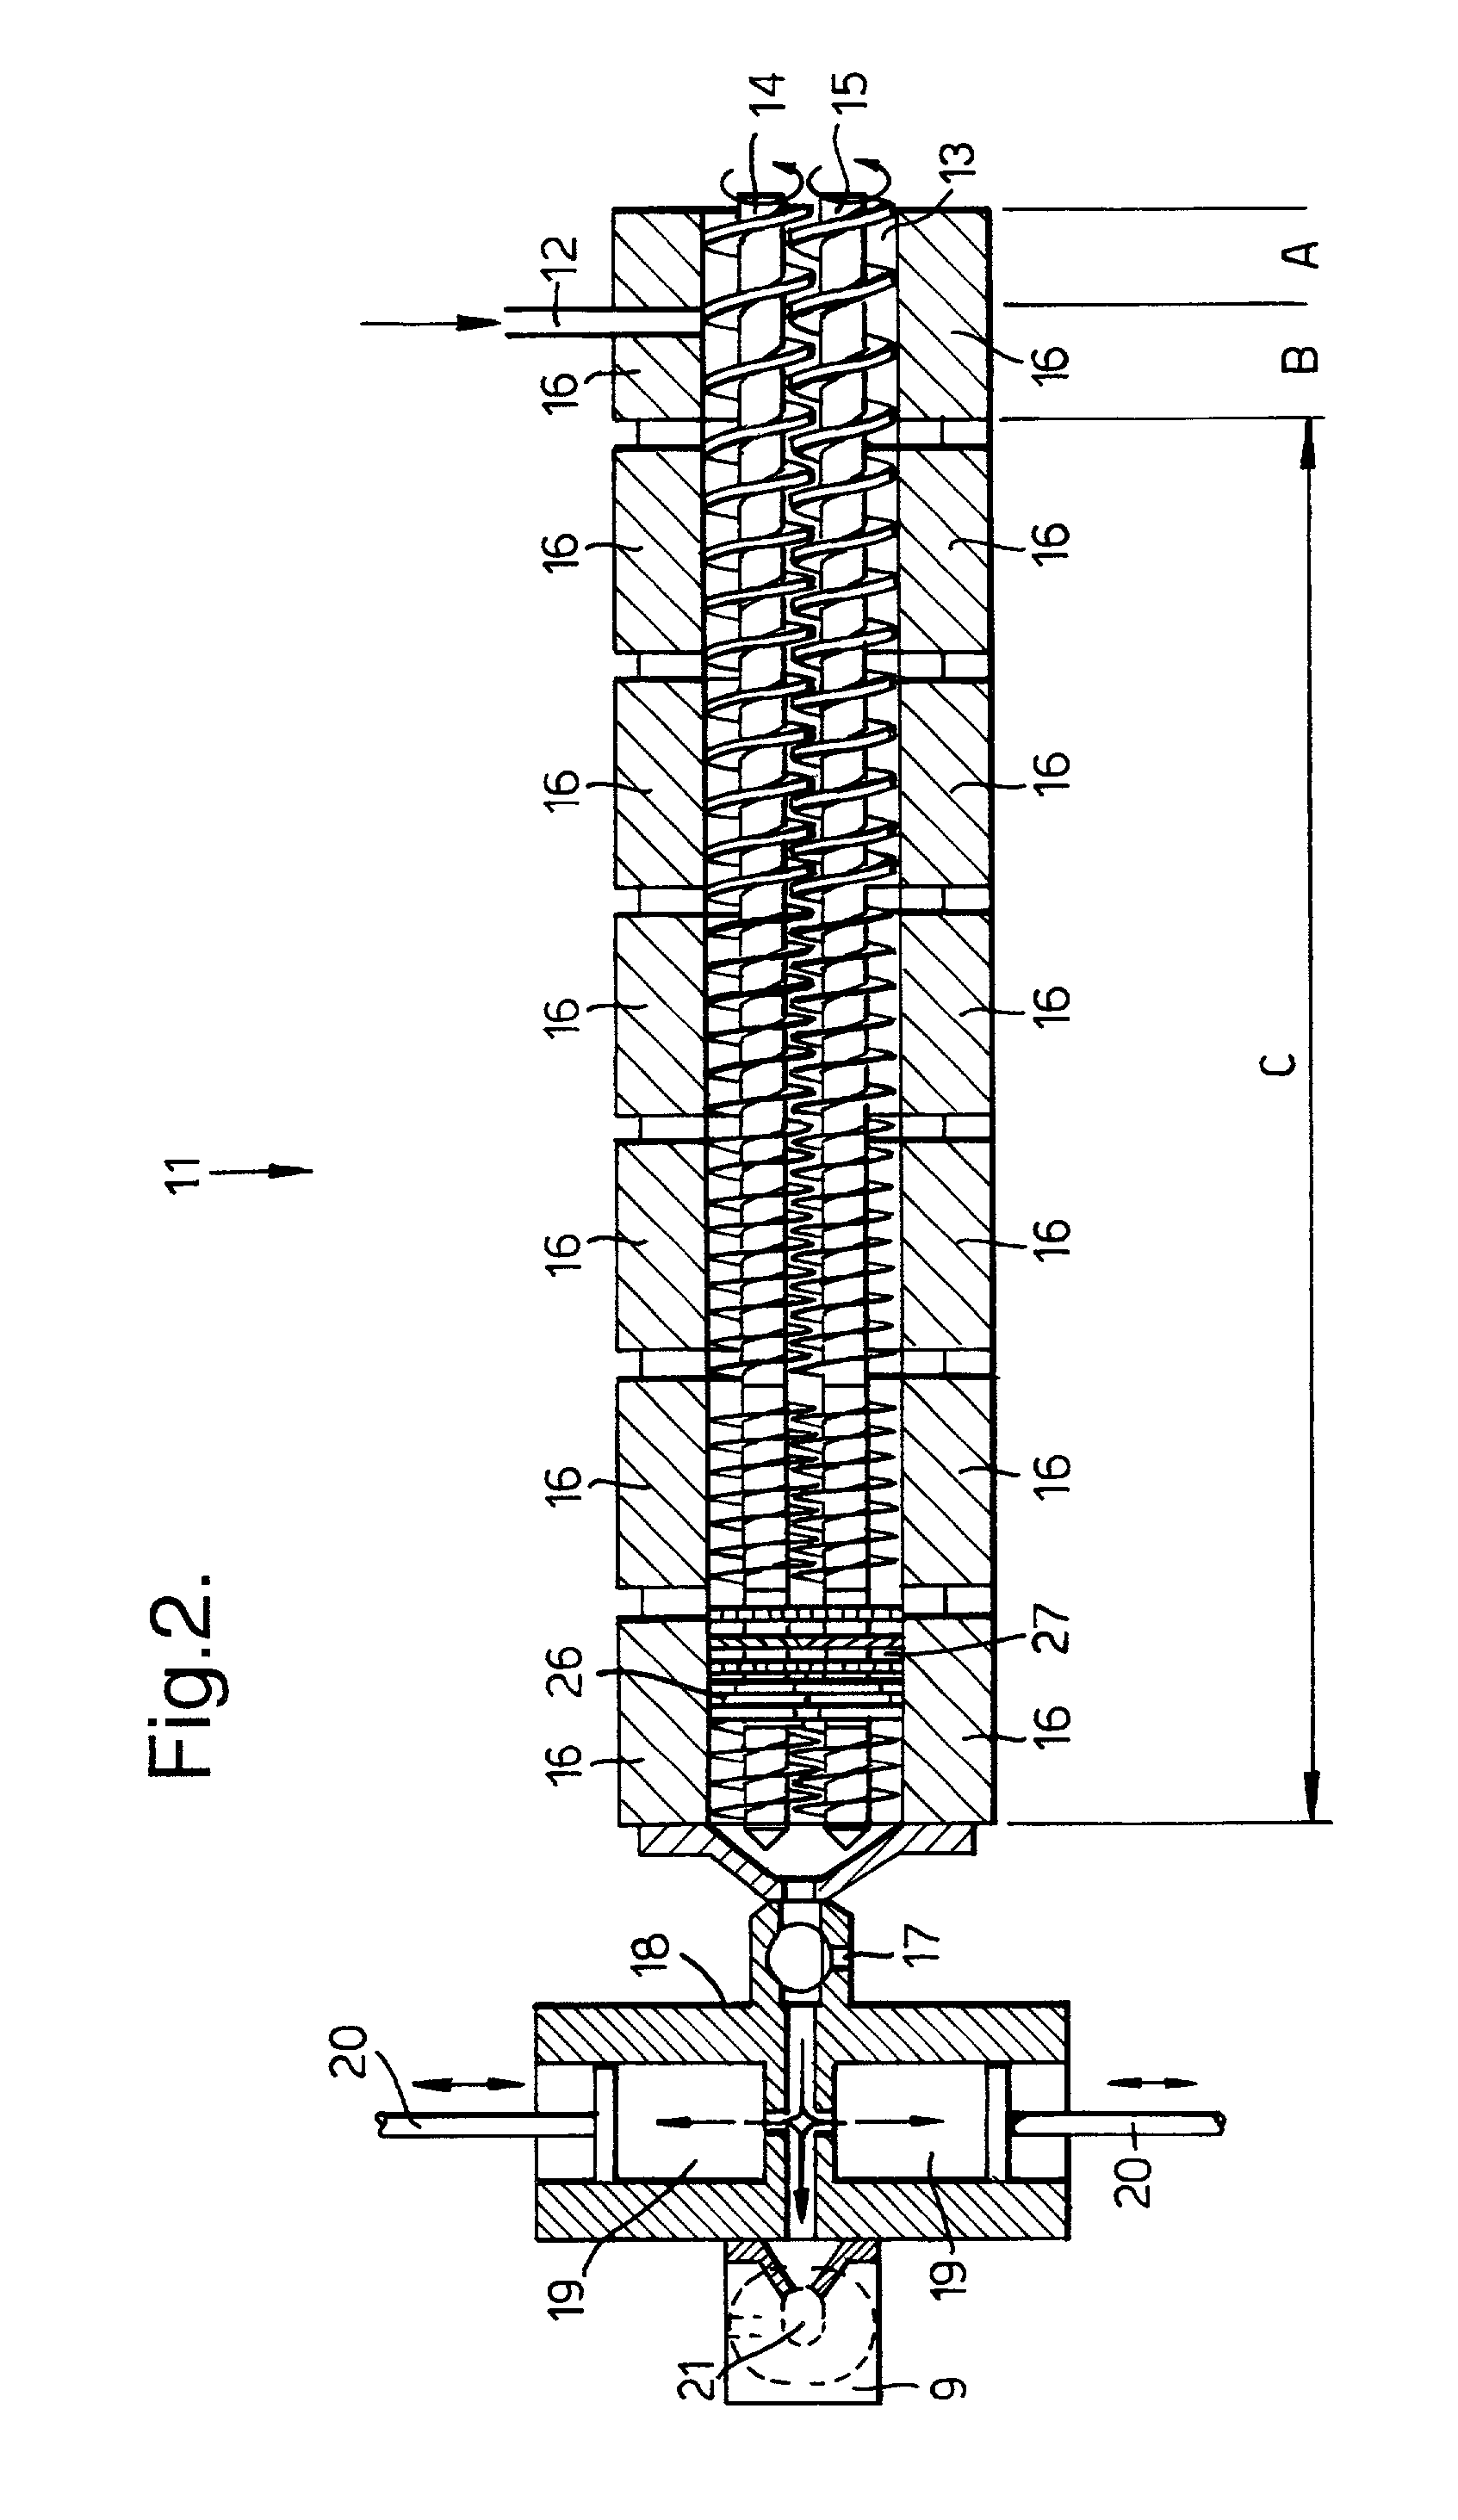 Process and apparatus for the production of a detergent composition